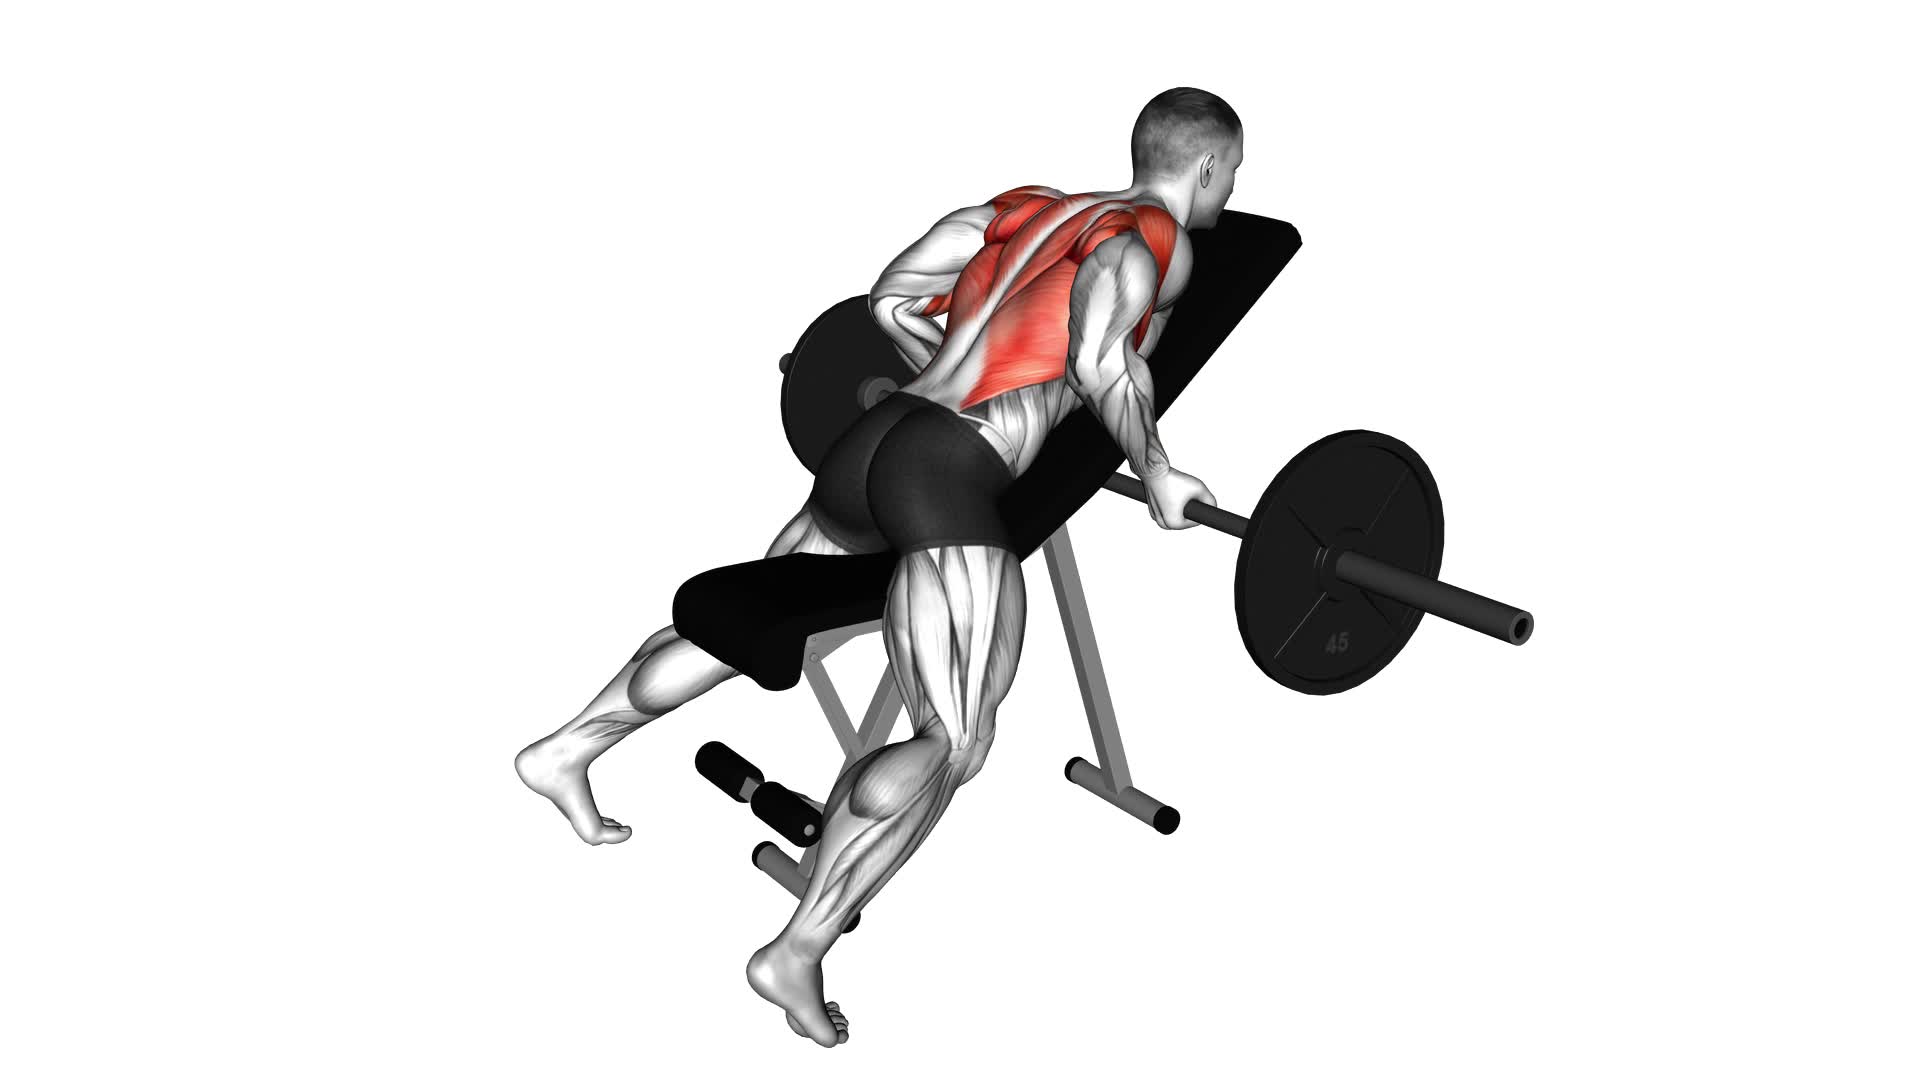 Barbell Reverse Grip Incline Bench Row - Video Exercise Guide & Tips